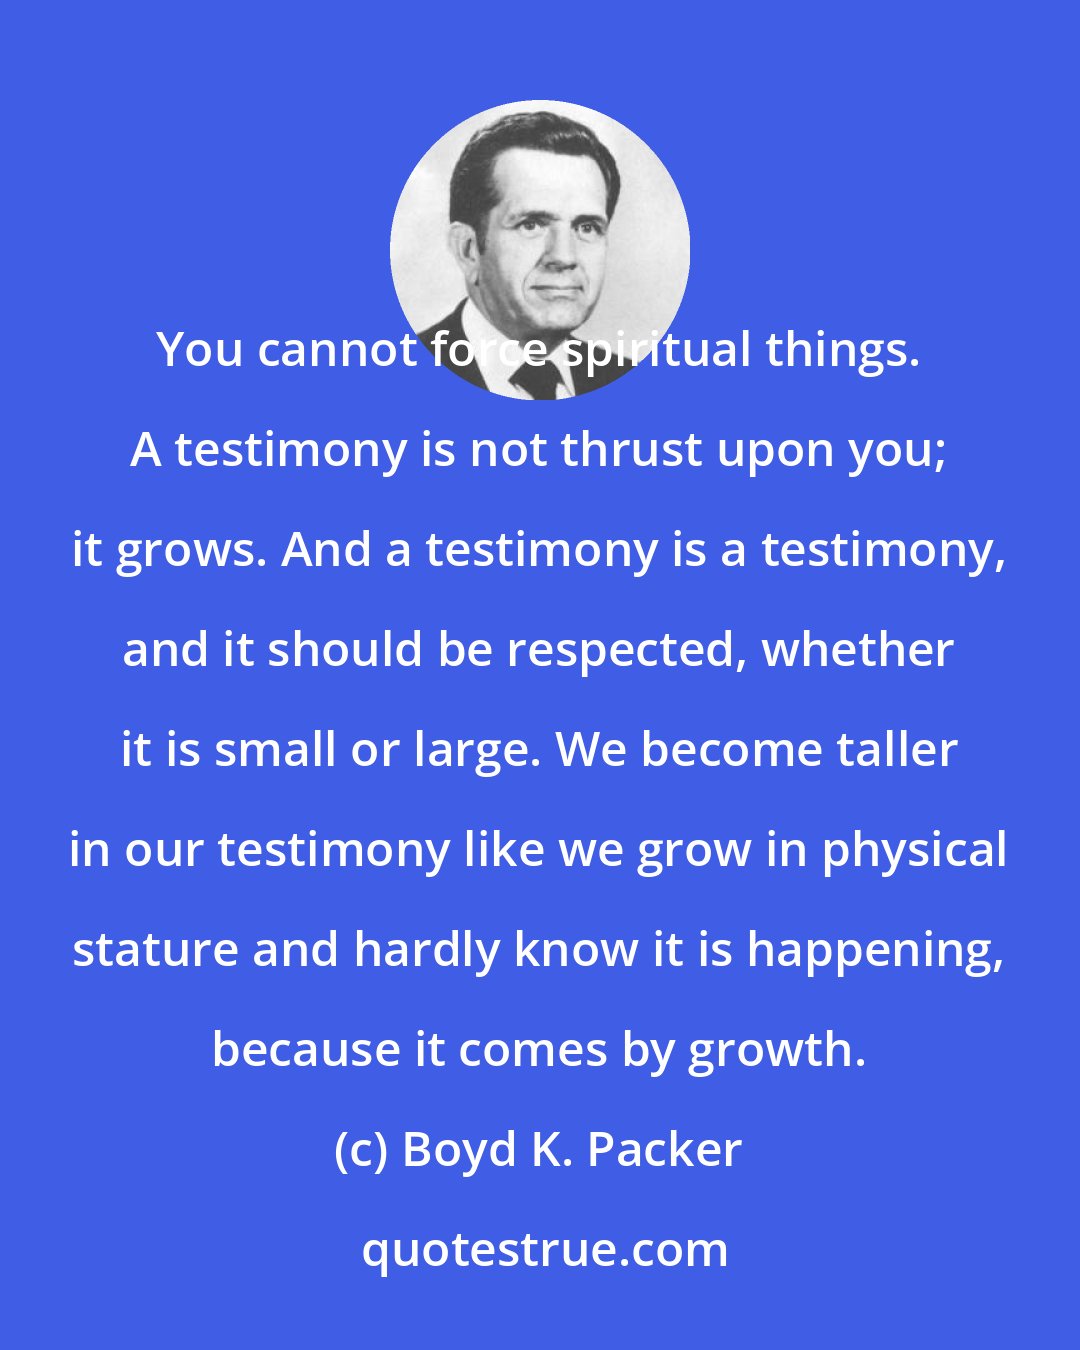 Boyd K. Packer: You cannot force spiritual things. A testimony is not thrust upon you; it grows. And a testimony is a testimony, and it should be respected, whether it is small or large. We become taller in our testimony like we grow in physical stature and hardly know it is happening, because it comes by growth.